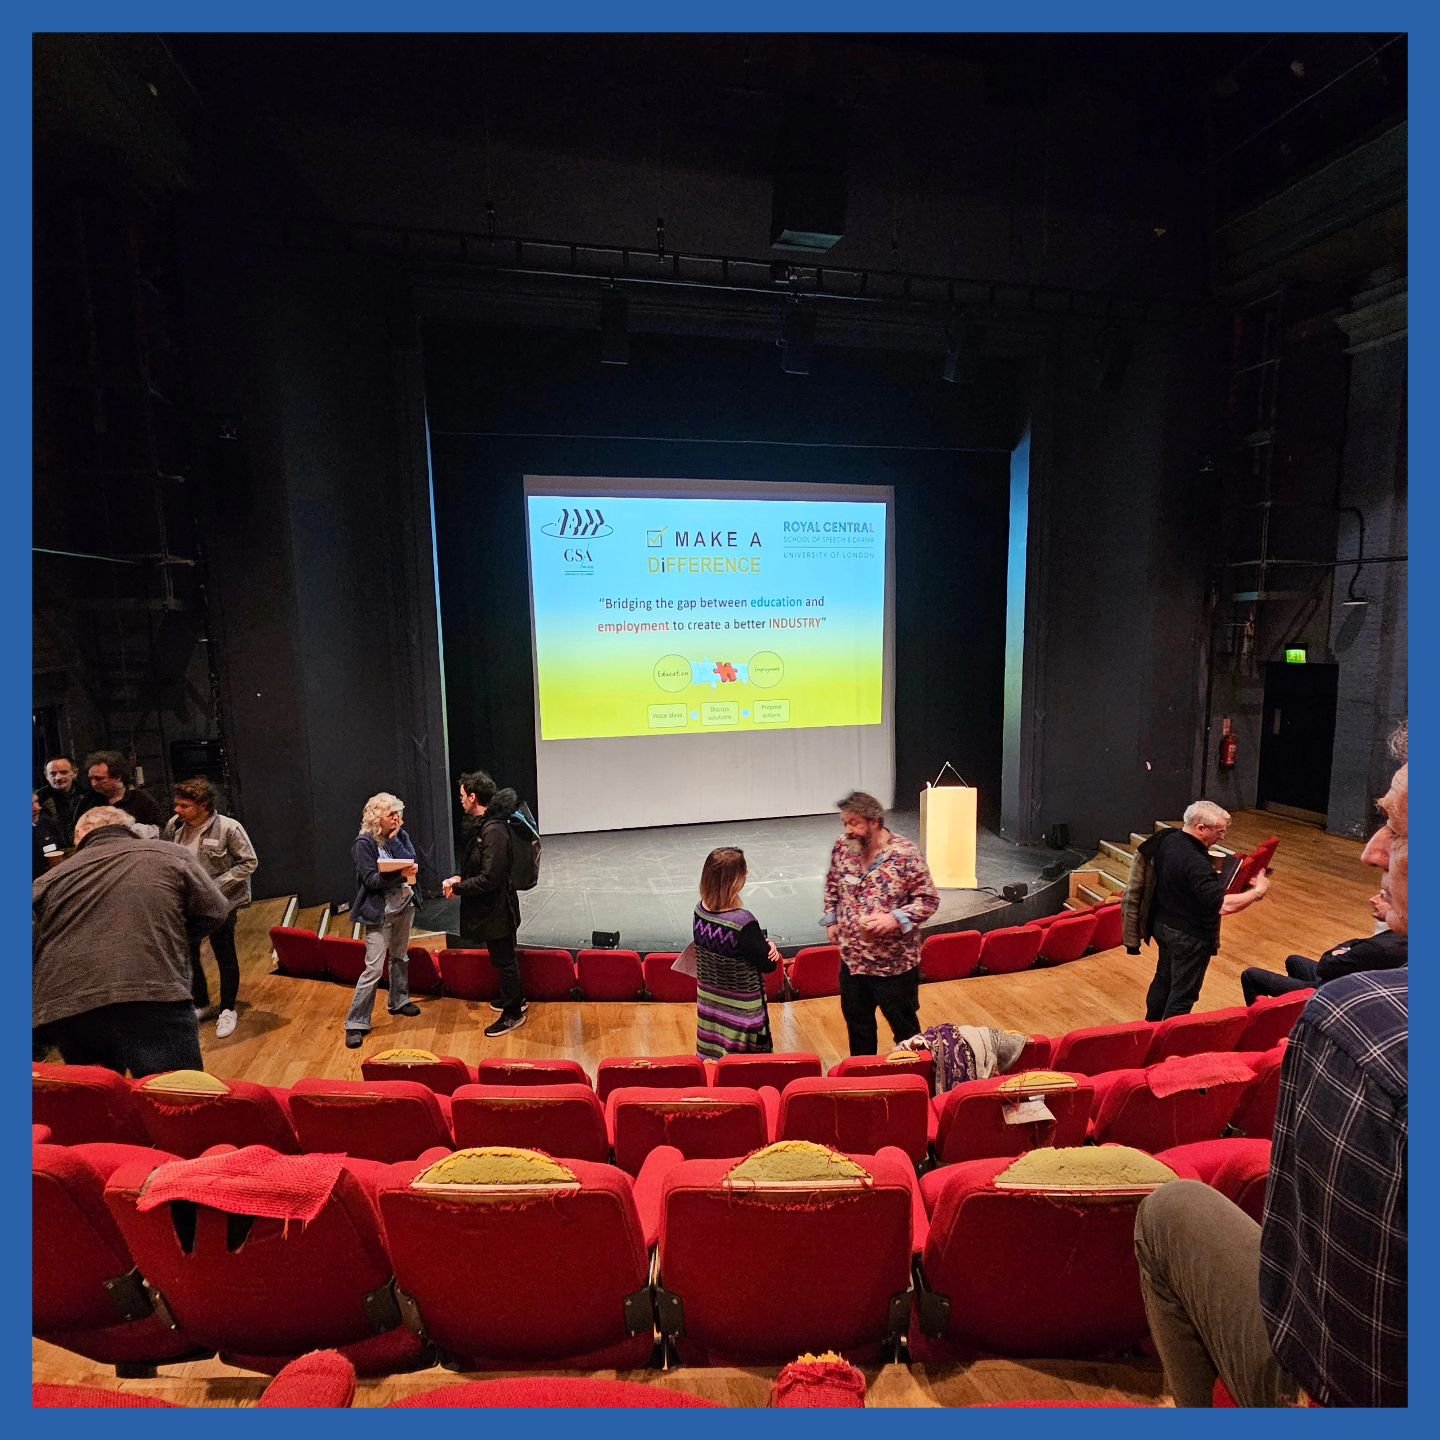 We had a fantastic time at the @theabtt make a difference conference last week! Interesting insights and conversations surrounding bridging the gap between Education and Employment. Plenty of food for thought and some great ideas for actions to bridg